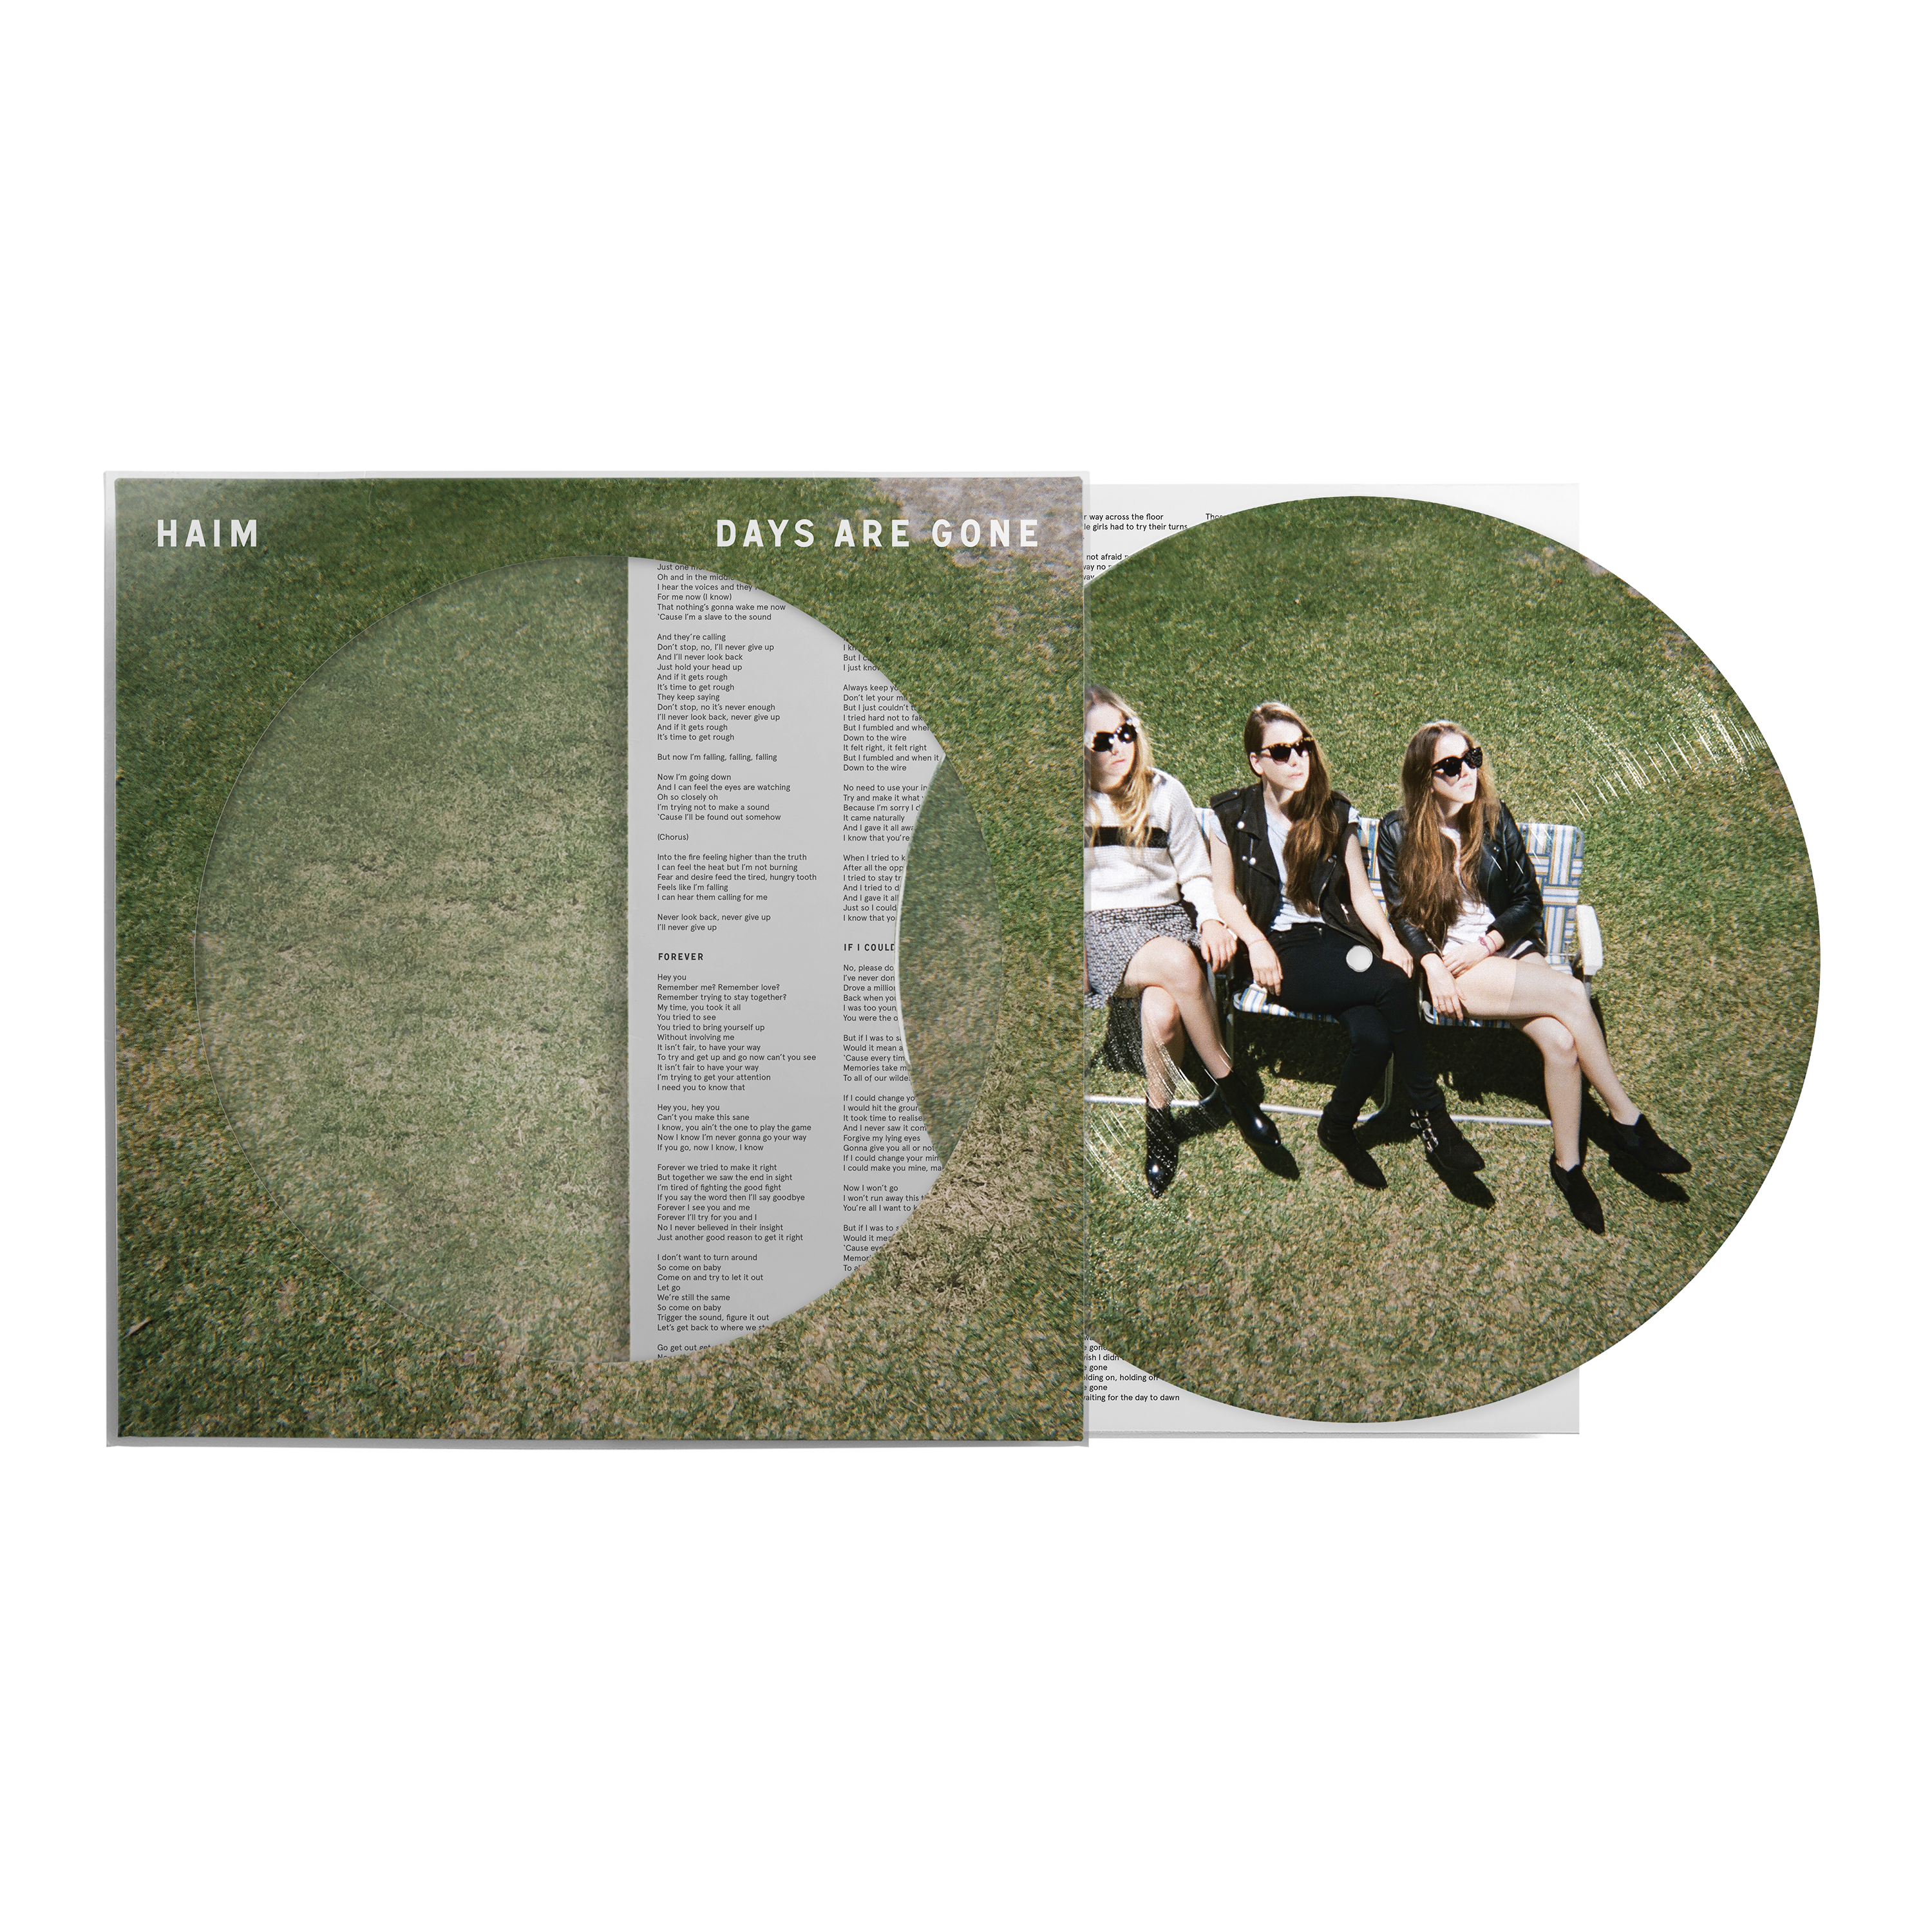 Days Are Gone (10th Anniversary): Transparent Green Vinyl 2LP, Picture Disc, Cassette + Signed Art Card